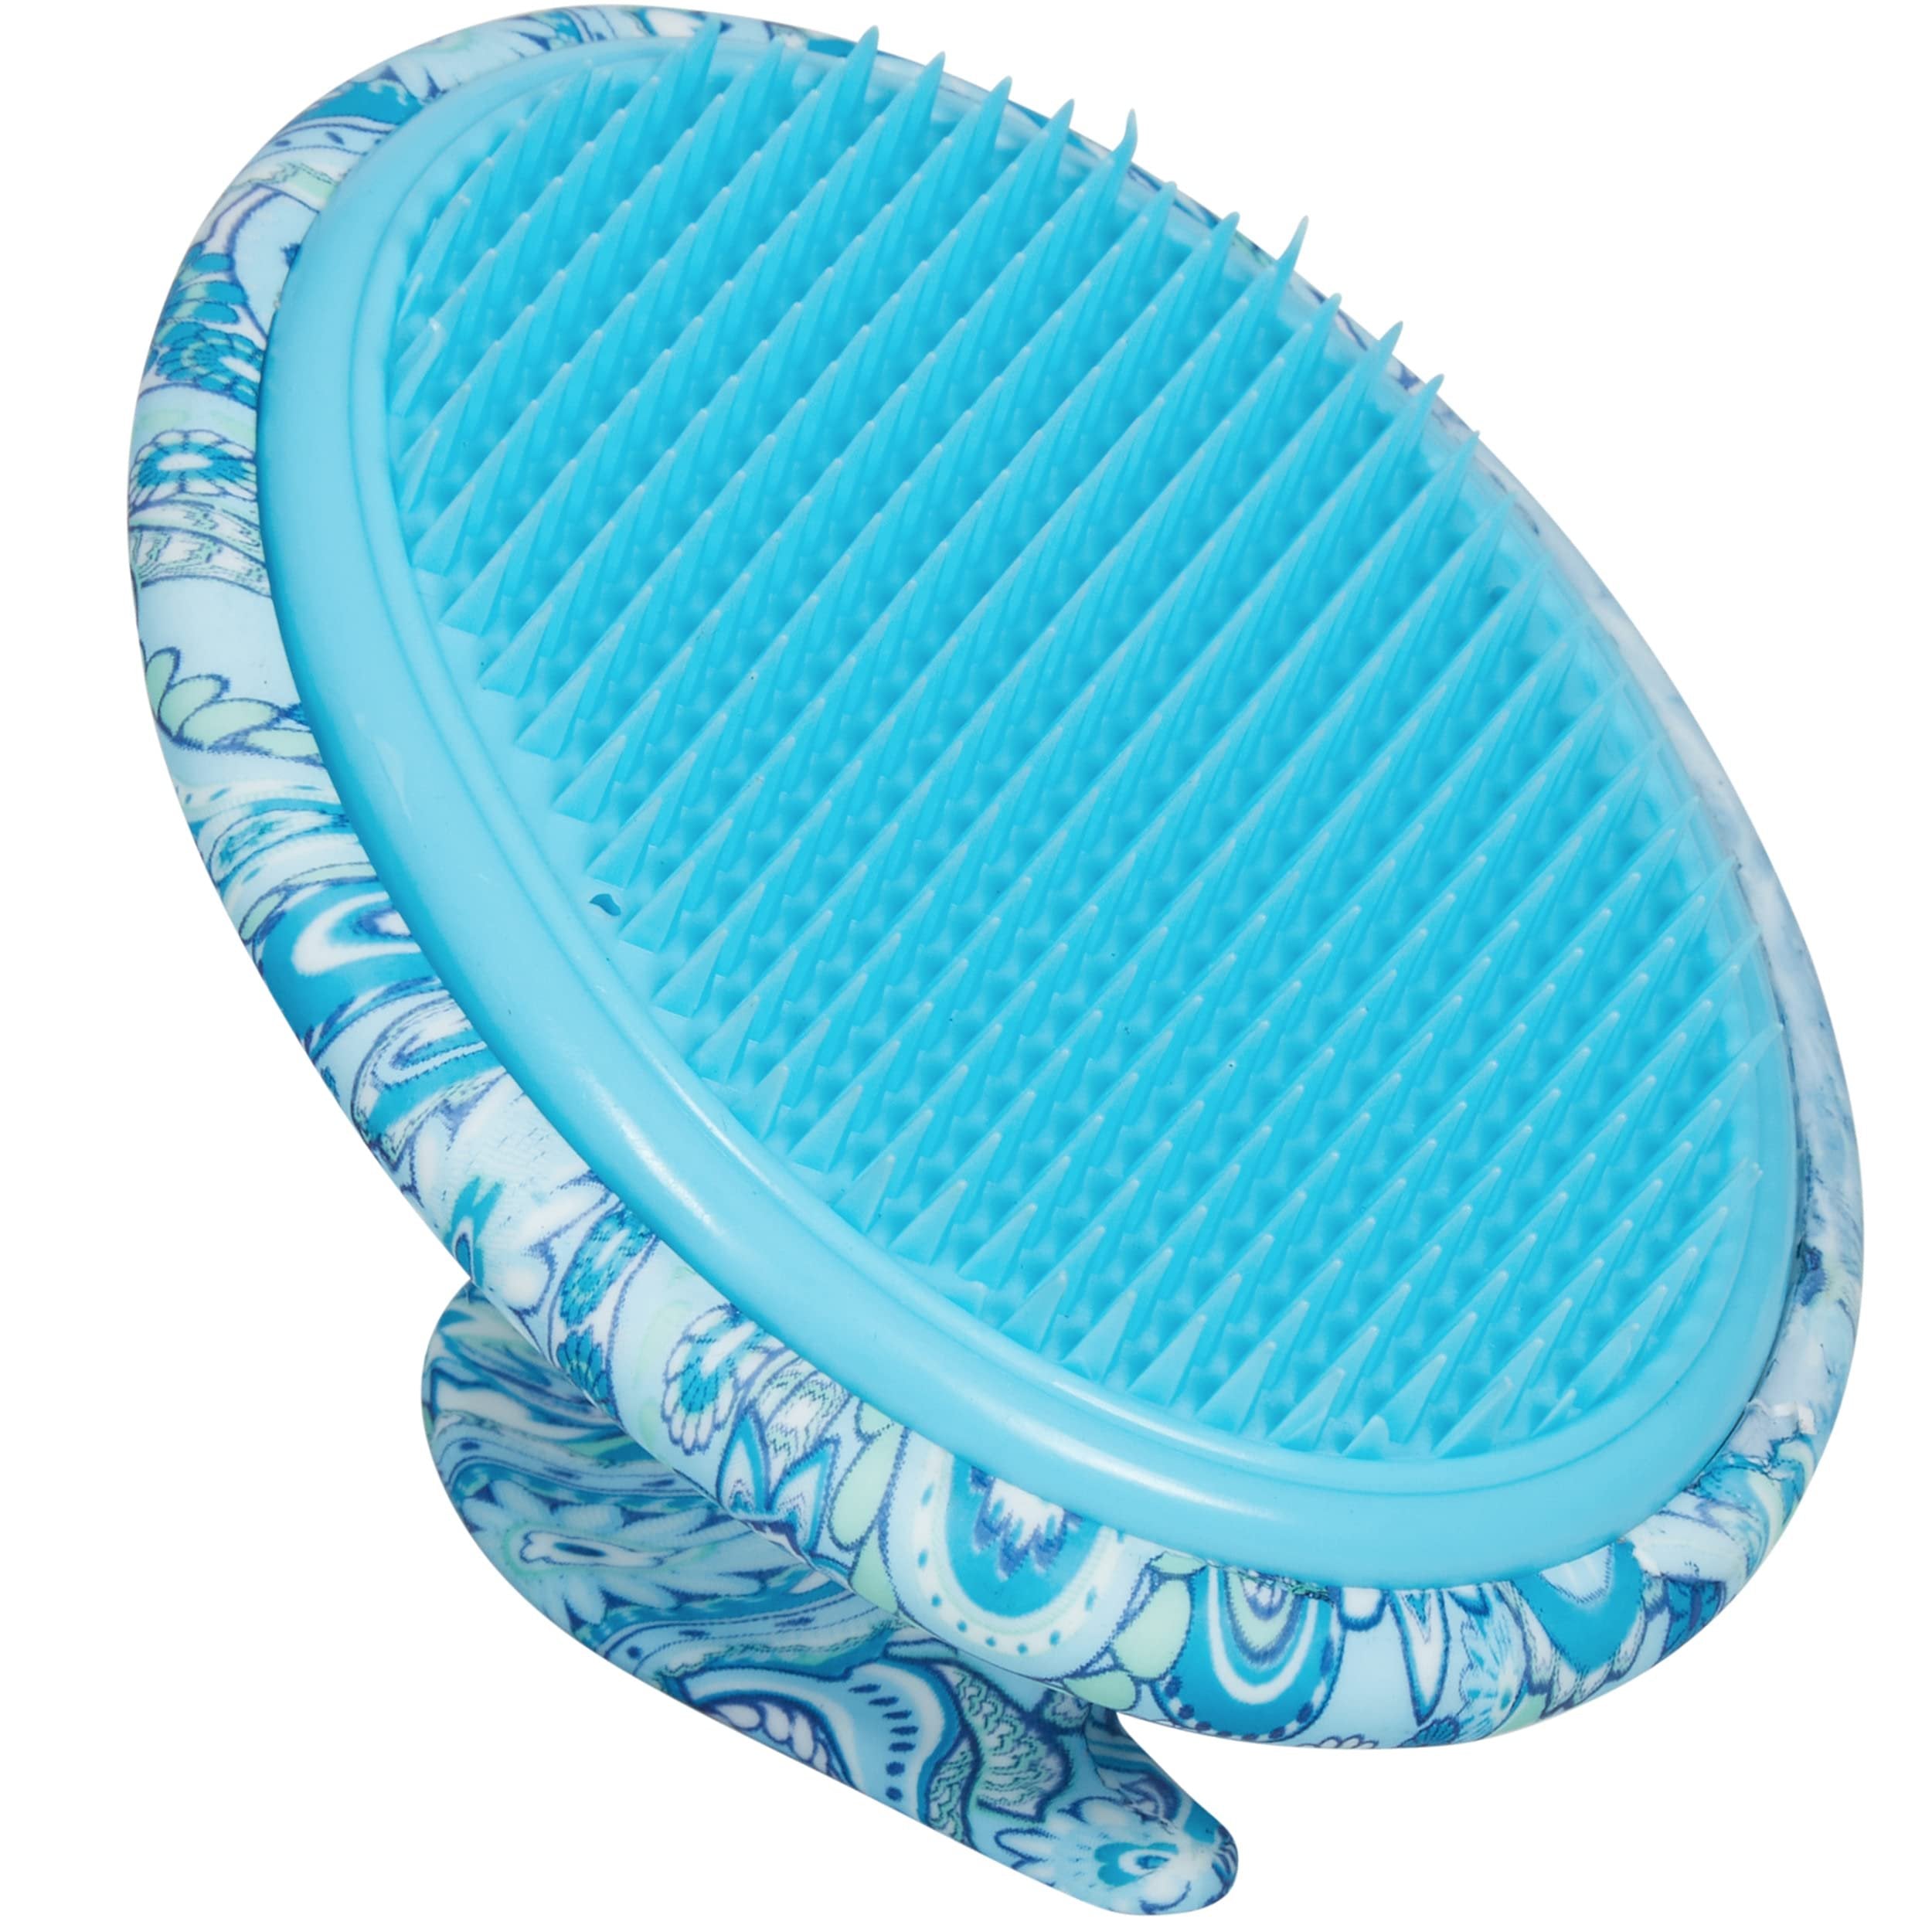 Exfoliating Brush to Treat and Prevent Razor Bumps and Ingrown Hairs - Eliminate Shaving Irritation for Legs, Armpit, Bikini Line - Silky Smooth Skin Solution for Men and Women by Dylonic